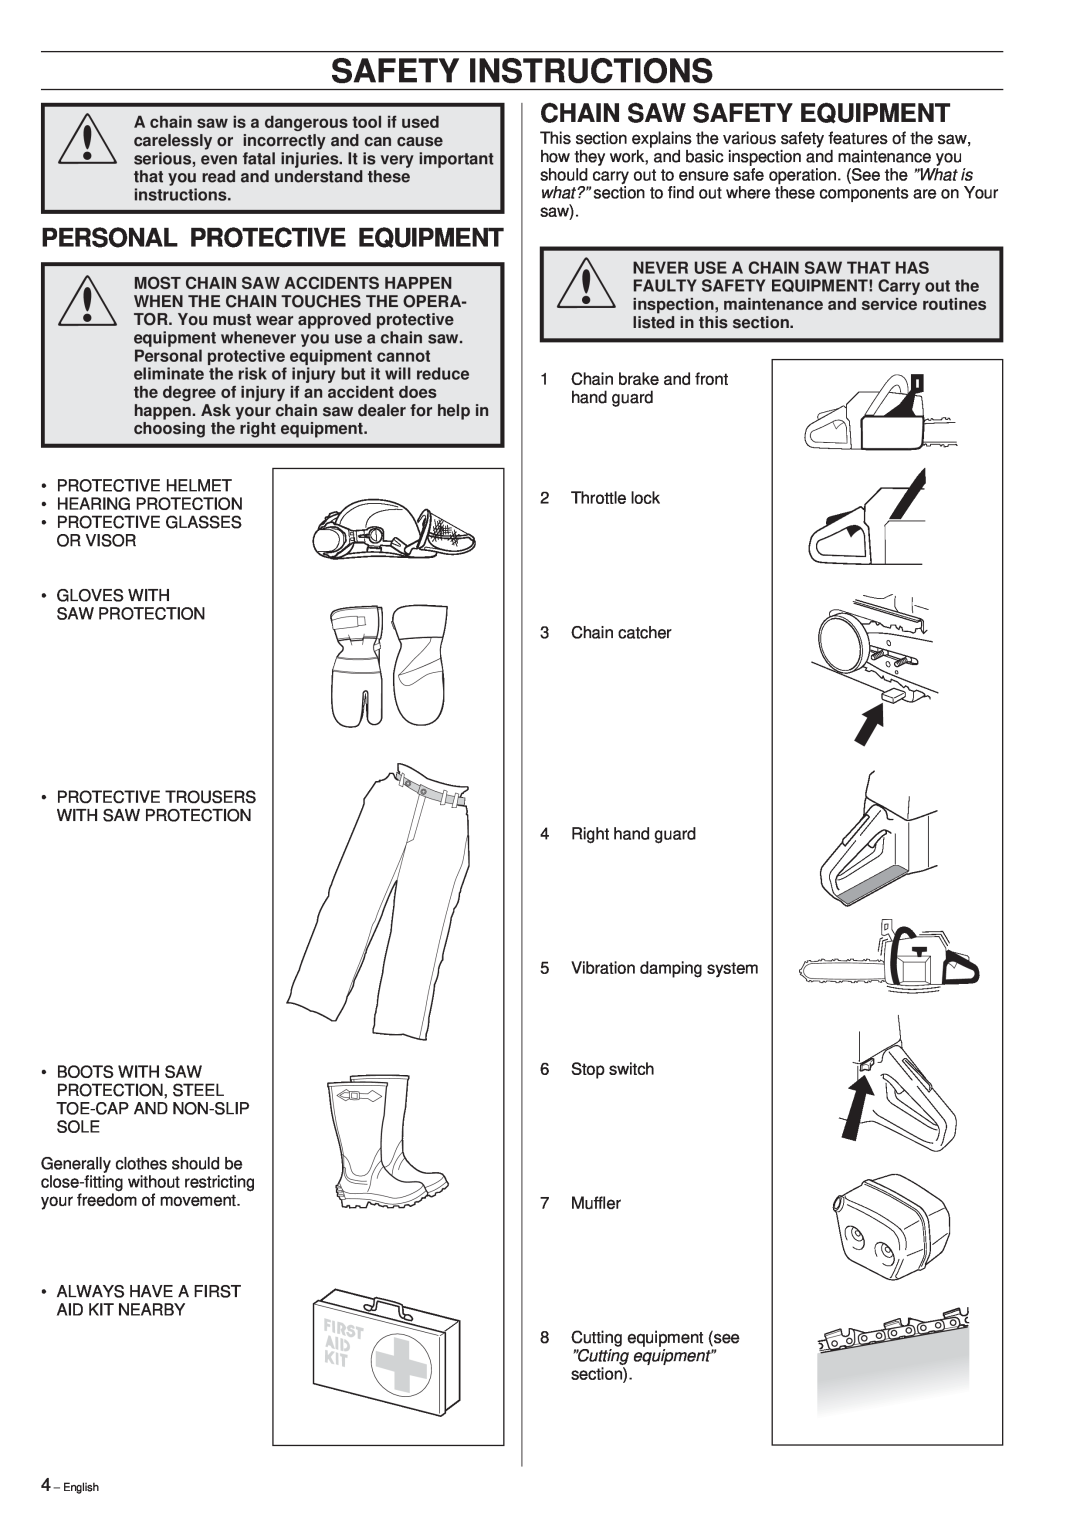 Husqvarna 394XP manual Safety Instructions, Personal Protective Equipment, Chain Saw Safety Equipment 